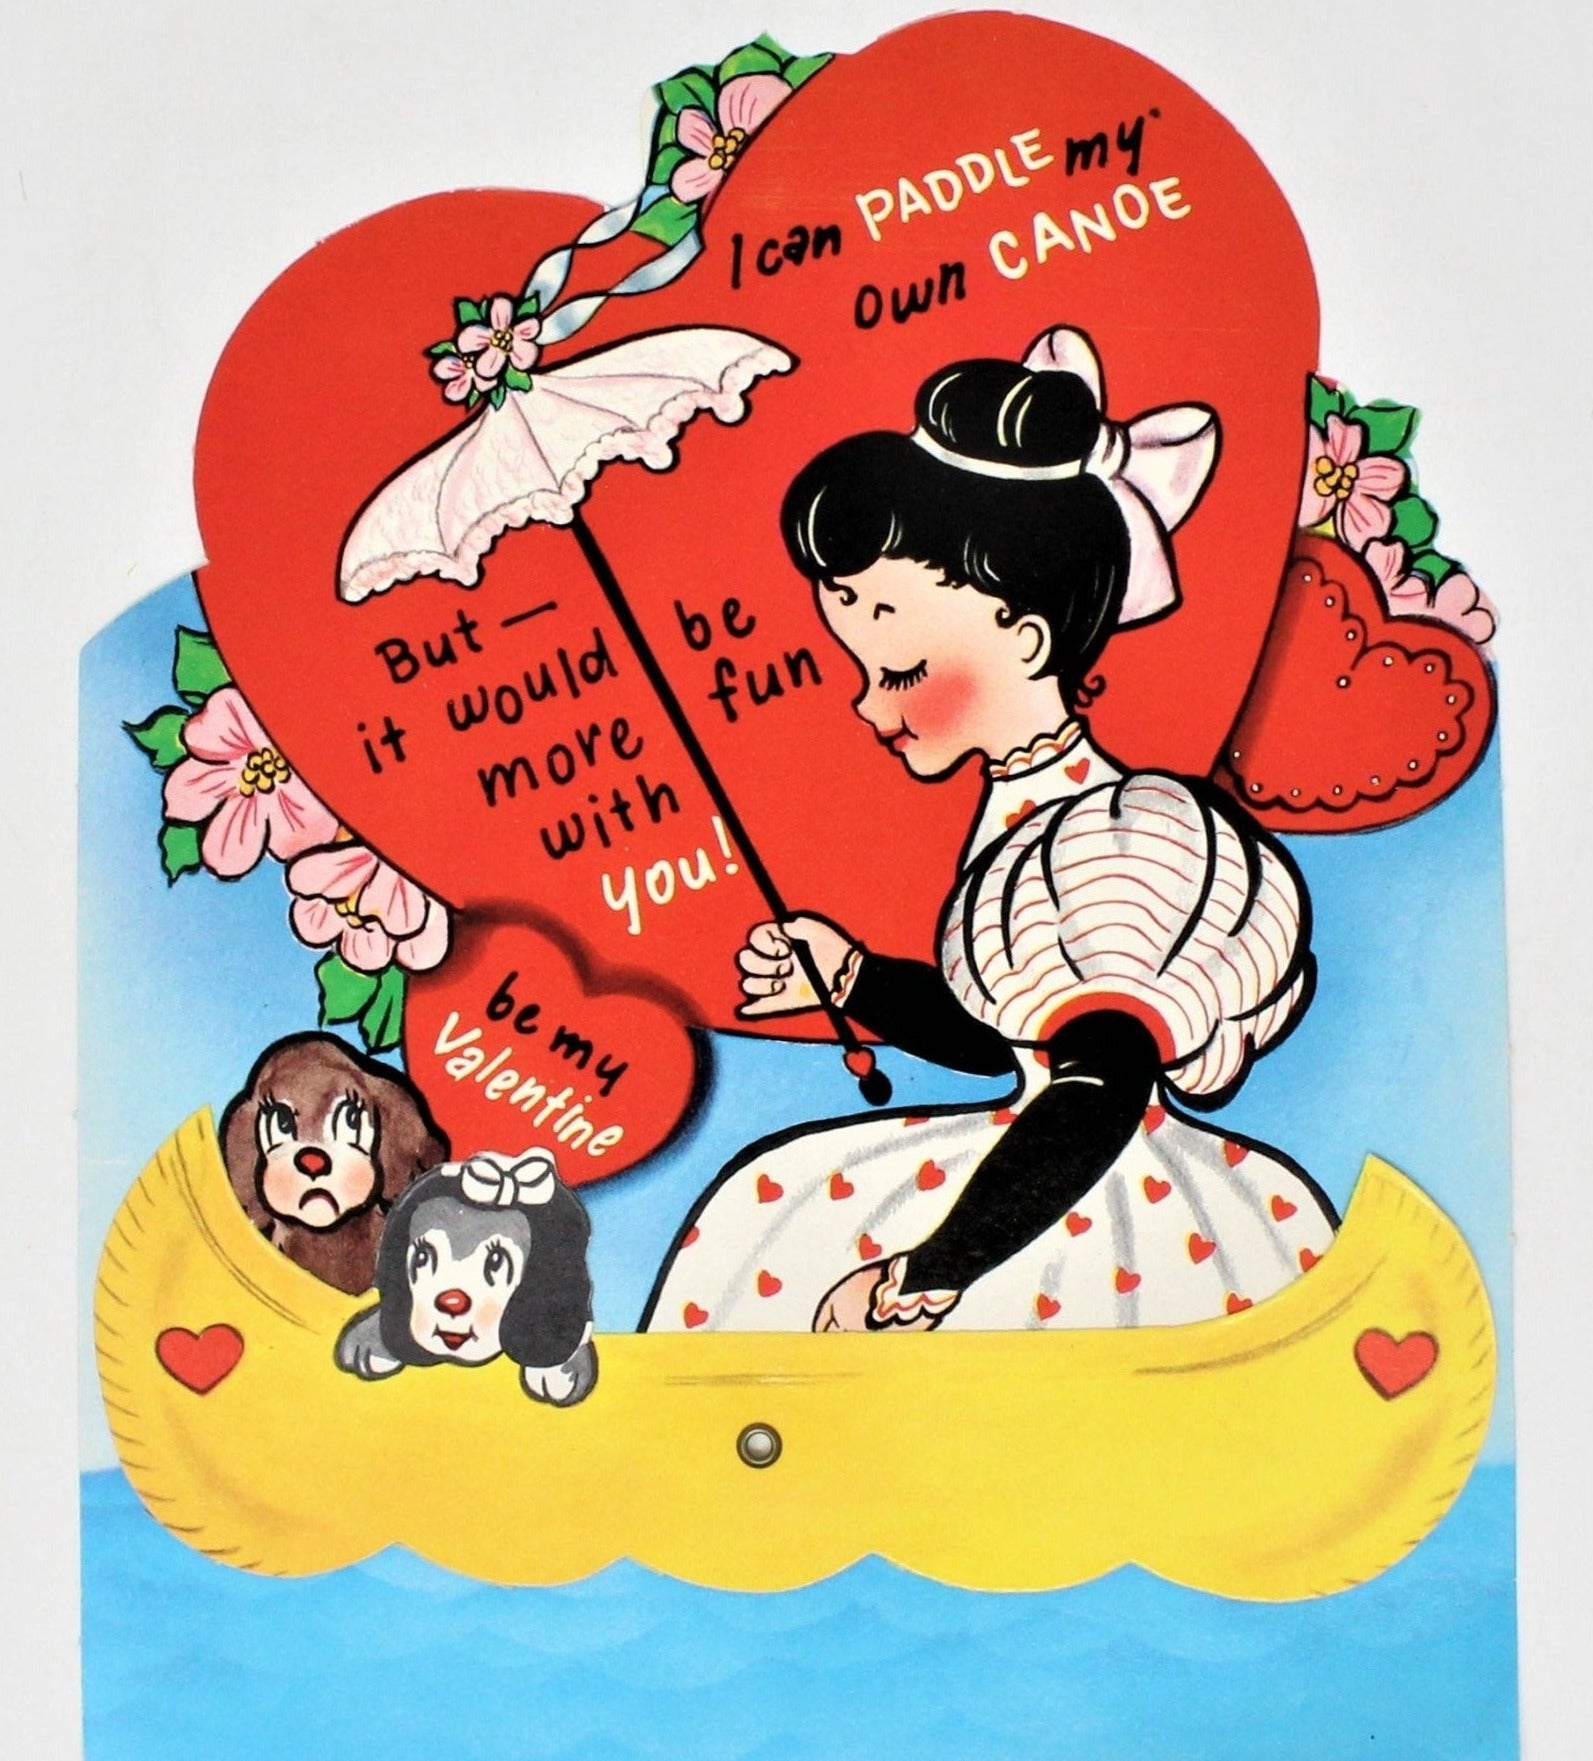 Greeting Card / Valentine, Movable, Girl with Heart, Large 7, Unused, –  Antigo Trunk